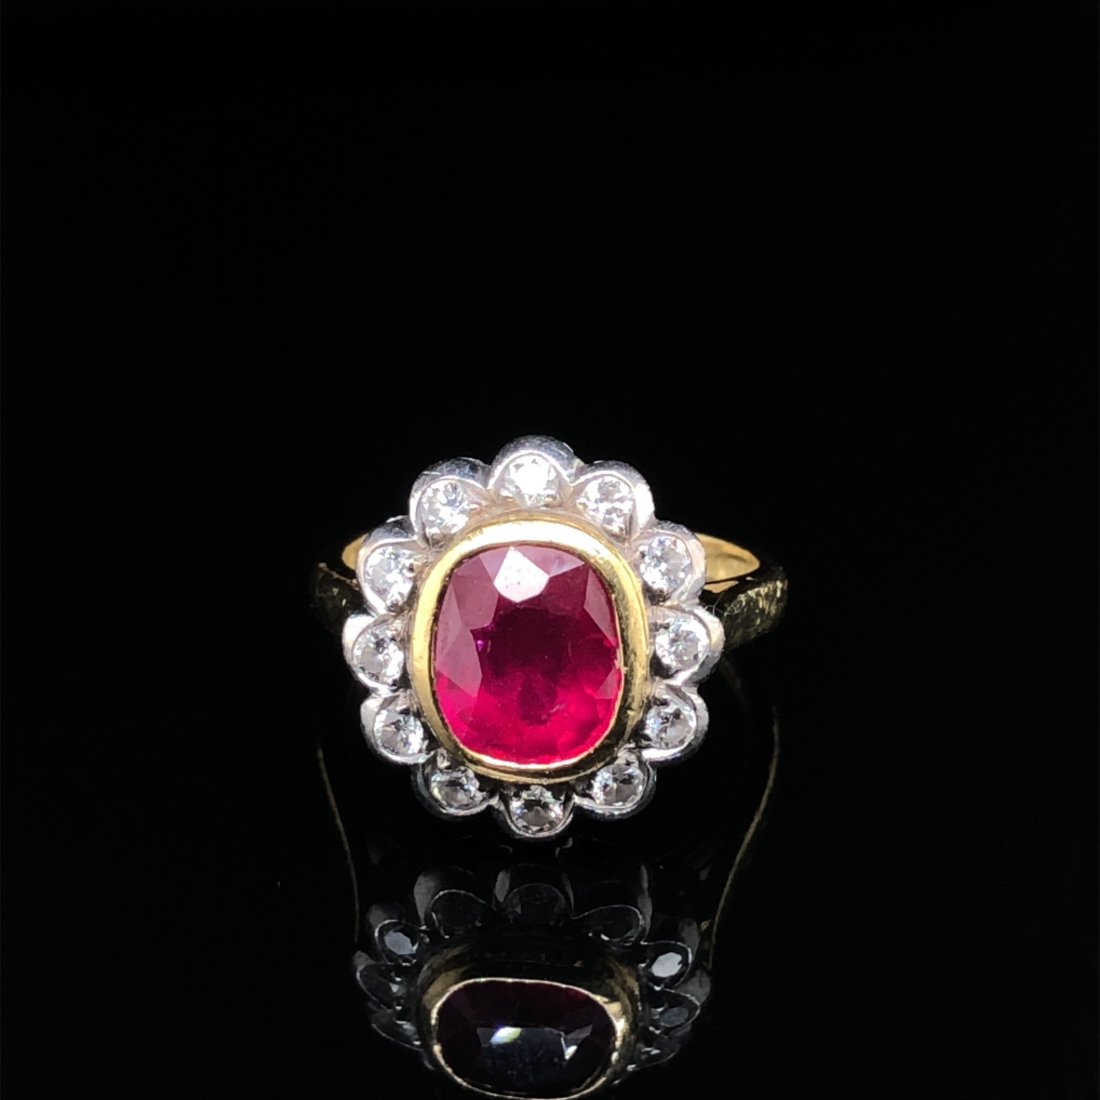 AN 18ct HALLMARKED GOLD RUBY AND DIAMOND OVAL SHAPED CLUSTER RING. THE SINGLE MEDIUM TO DARK - Image 12 of 20